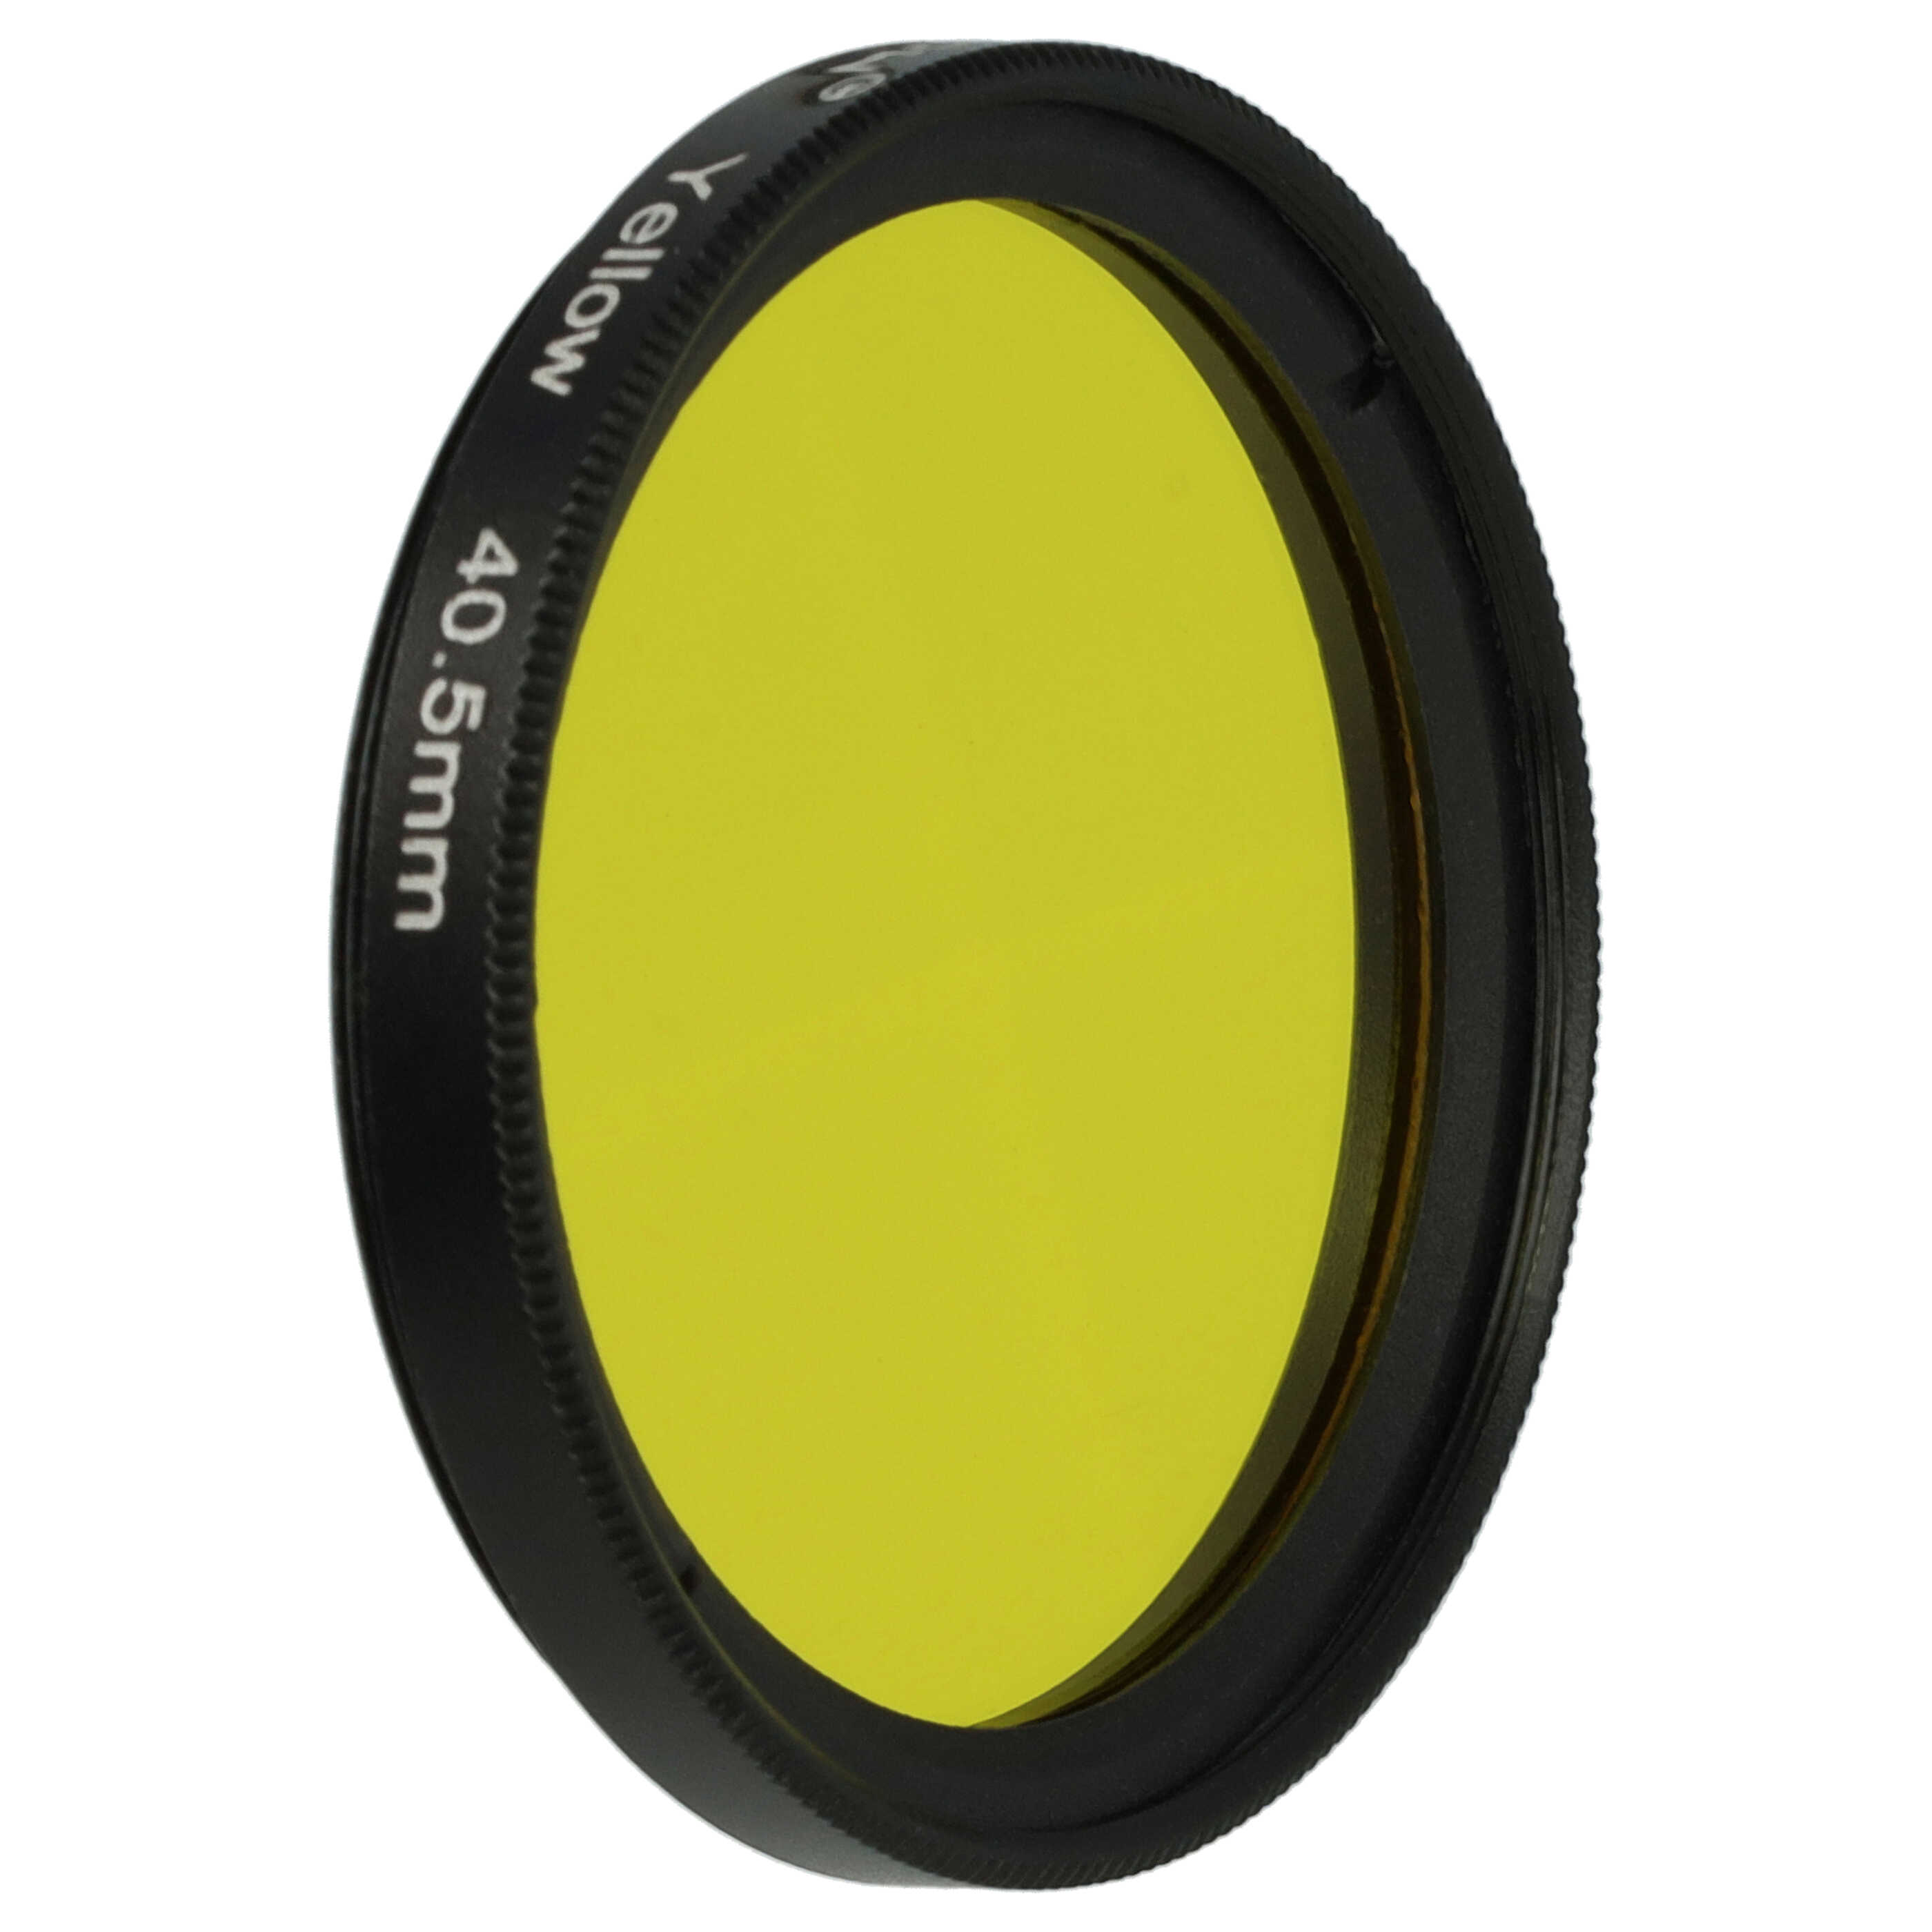 Coloured Filter, Yellow suitable for Camera Lenses with 40.5 mm Filter Thread - Yellow Filter